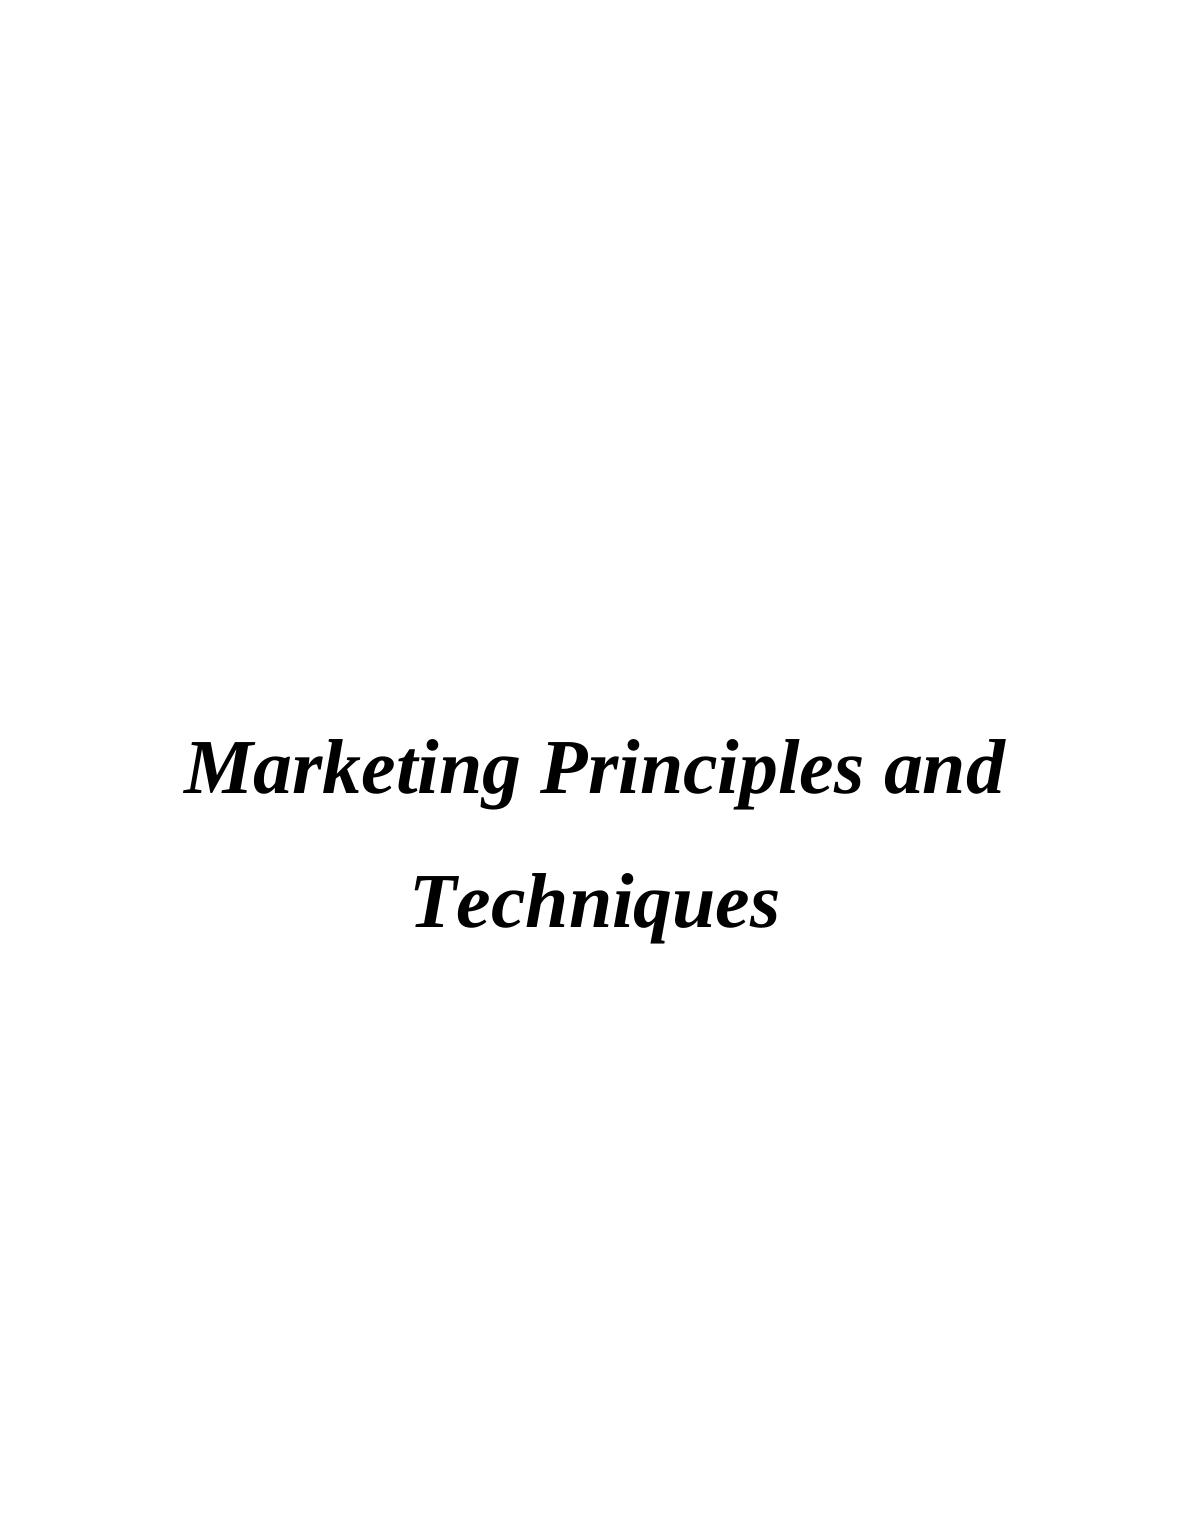 Market Analysis Techniques and Principles INTRODUCTION_1